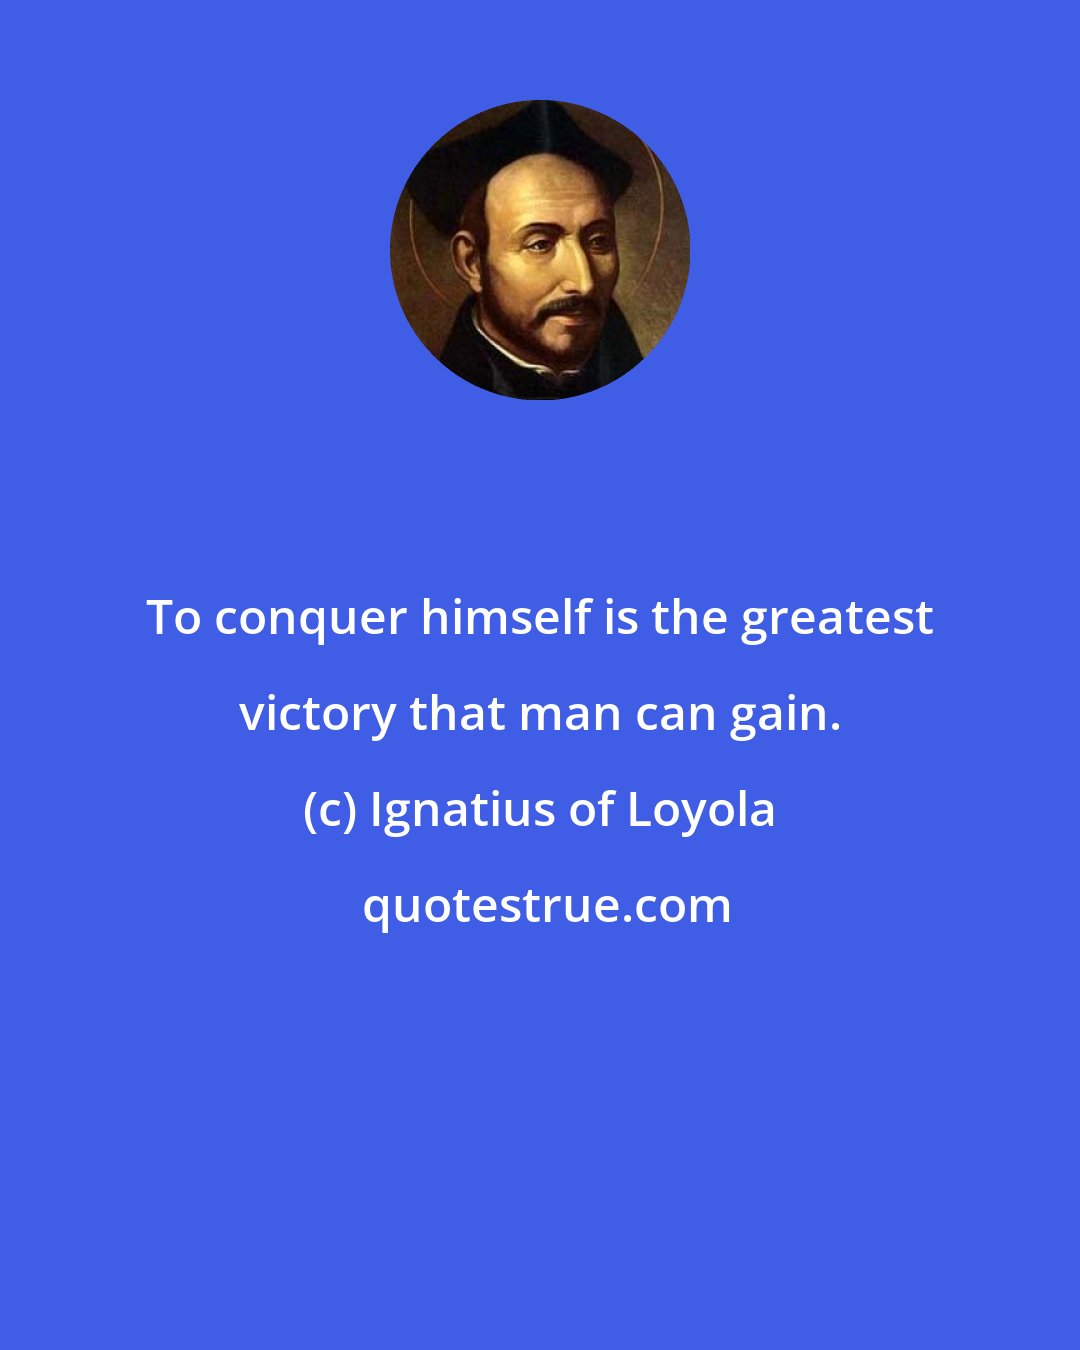 Ignatius of Loyola: To conquer himself is the greatest victory that man can gain.